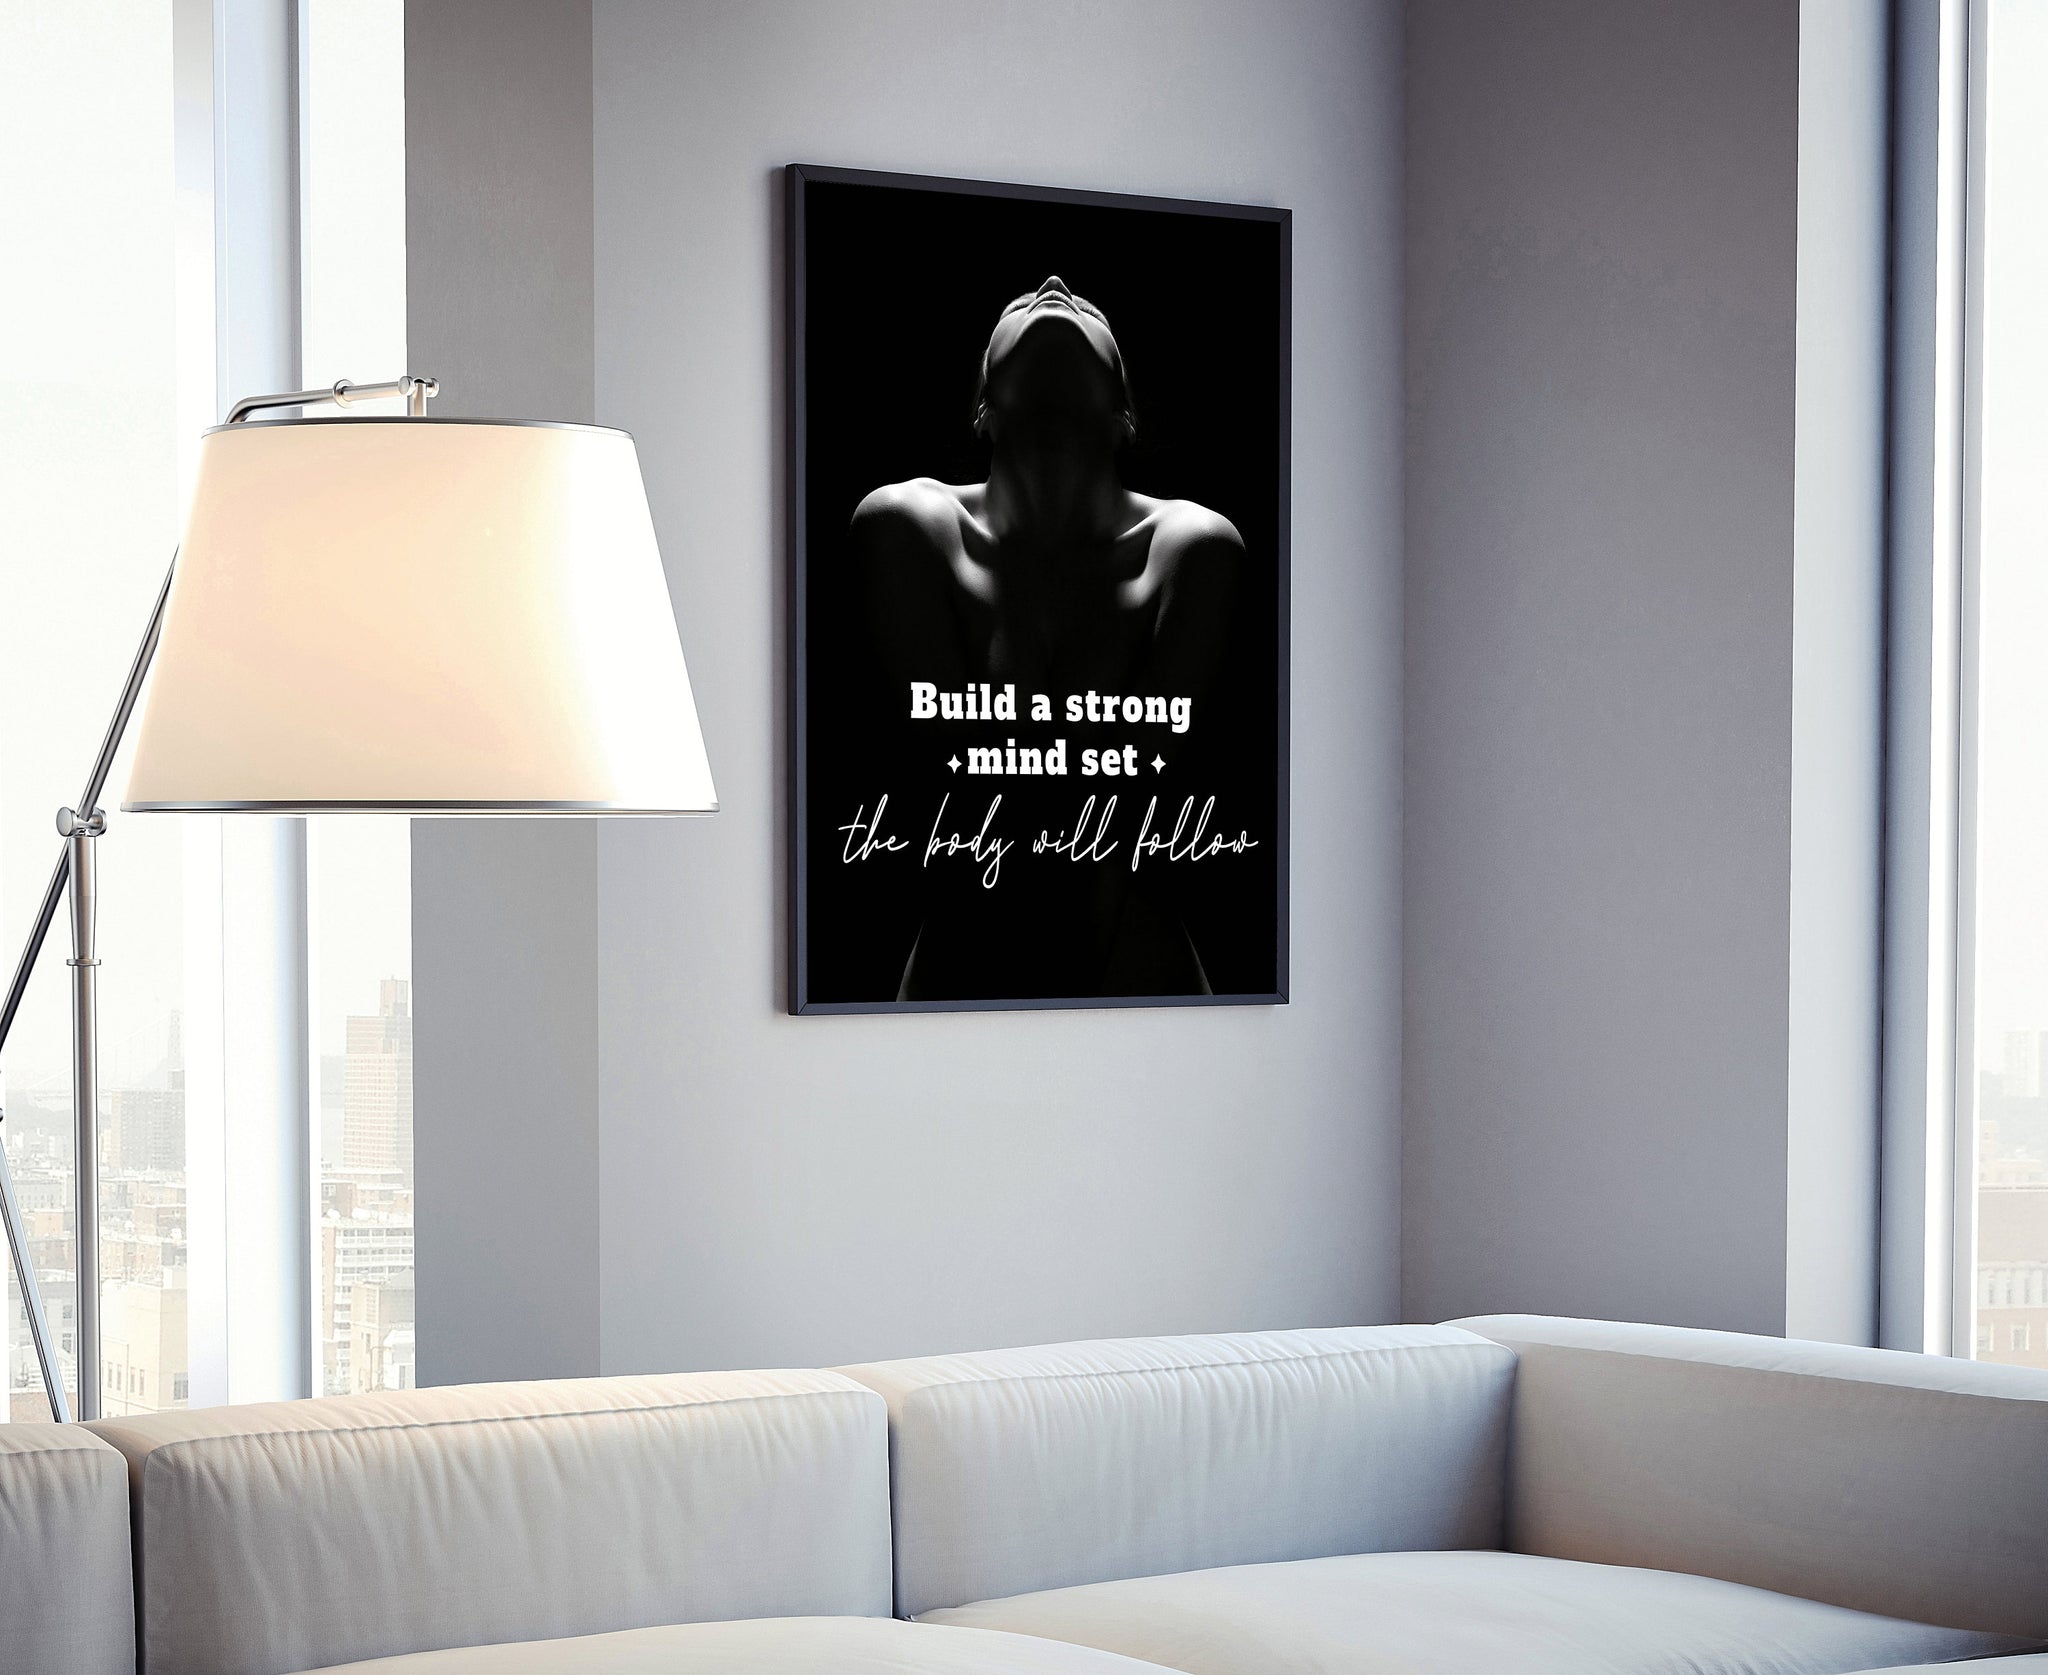 Gym wall art, Gym Poster, Gym quote, Gym Decor, Home gym, Home gym decor, Home gym poster, Inspired poster, Fitness decor,Motivational quote